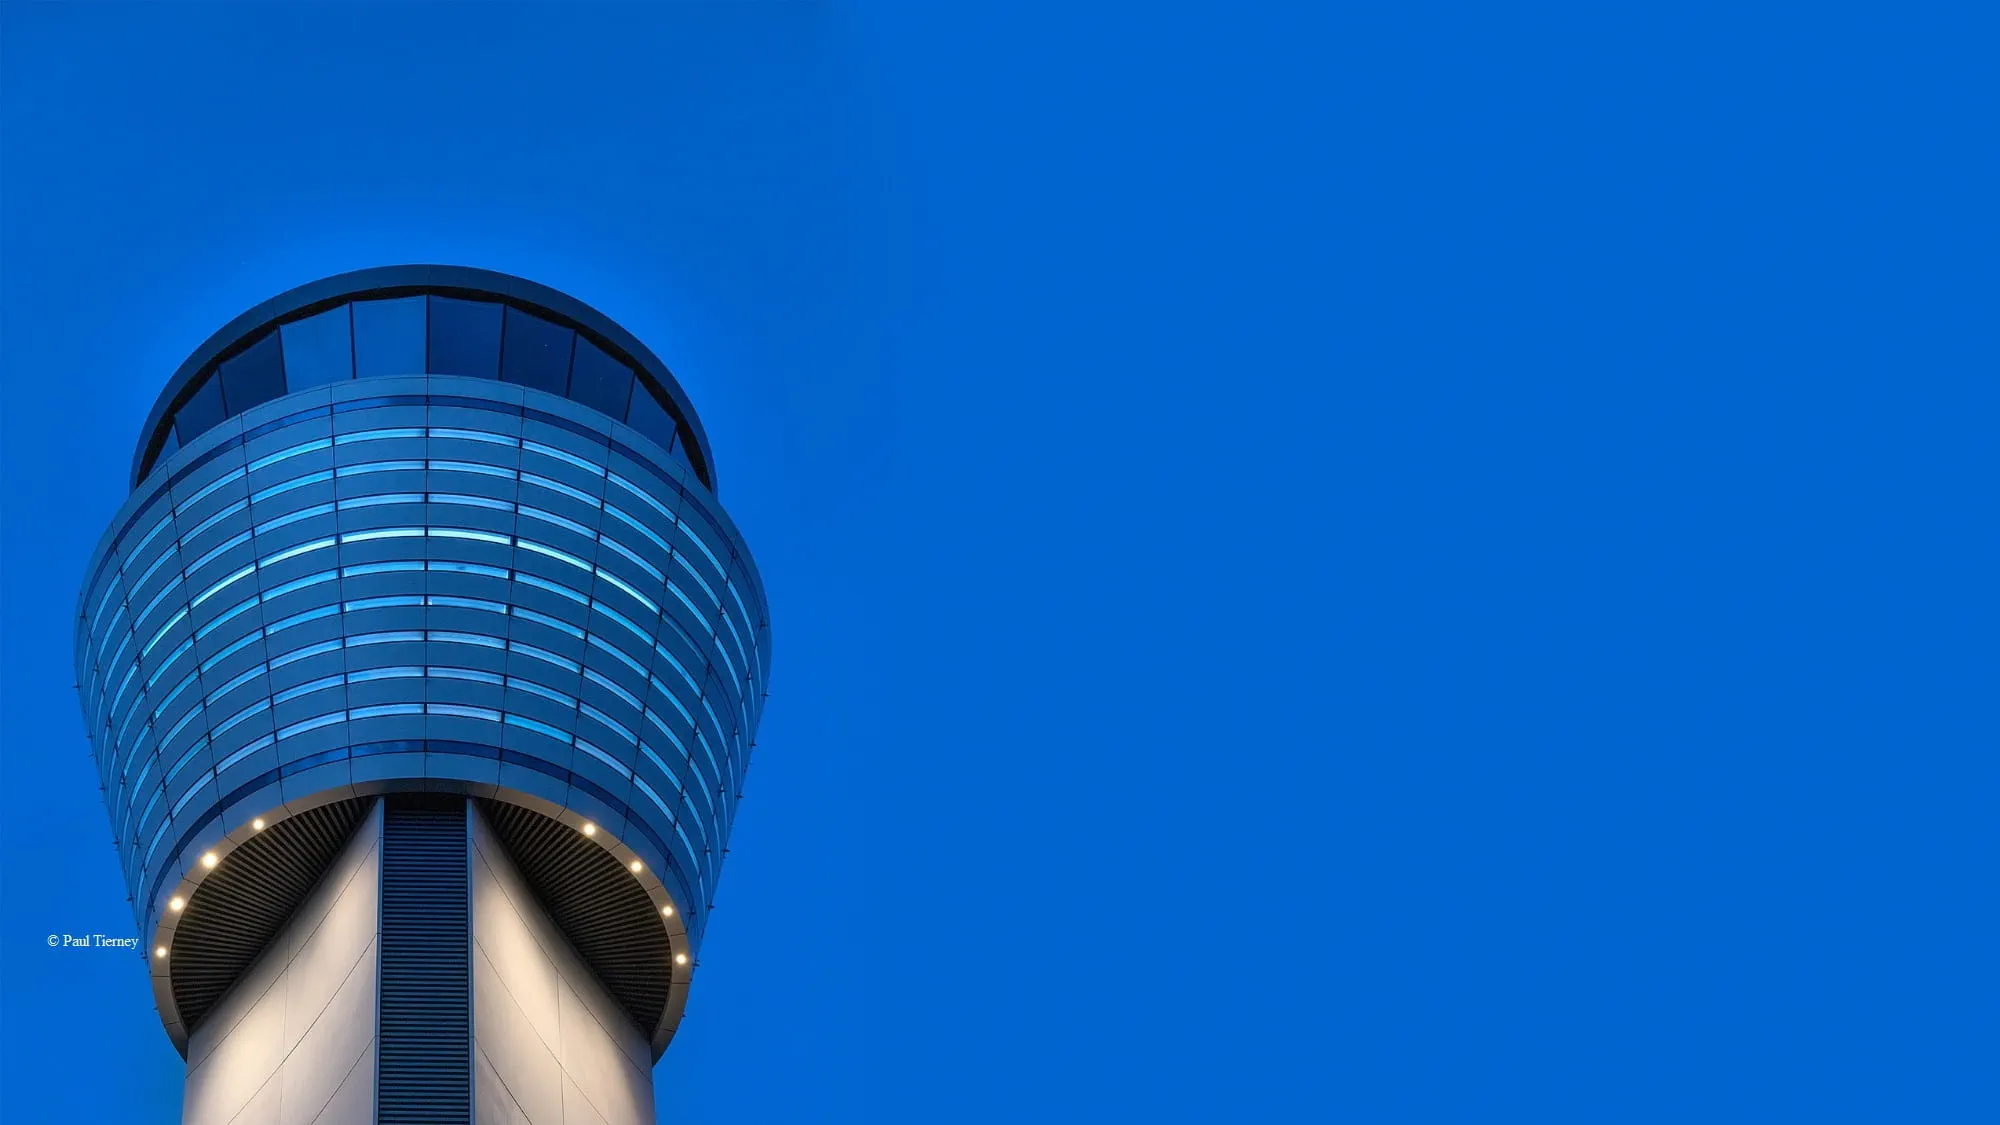 Dublin's new air traffic control tower, Ireland's tallest occupied